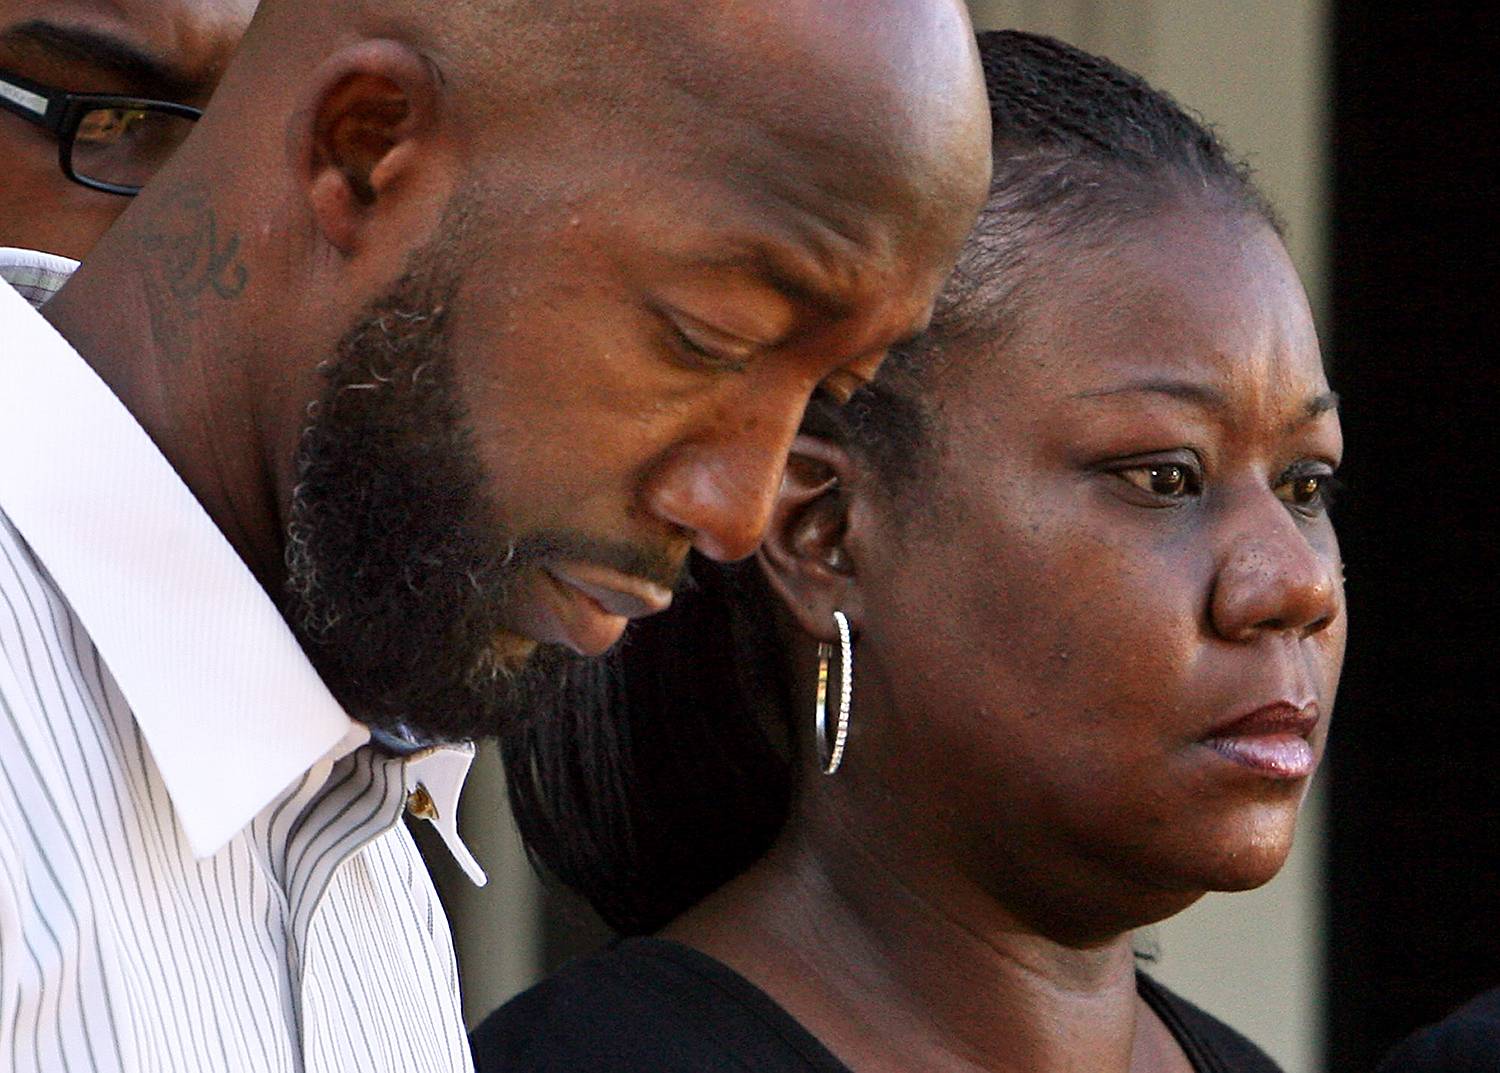 Parents of Slain Black Teen Want FBI Investigation - The parents of Trayvon Martin called on the FBI Friday to take over the investigation, saying they no longer trust the local police department.(Photo: Orlando Sentinel/MCT/Landov)